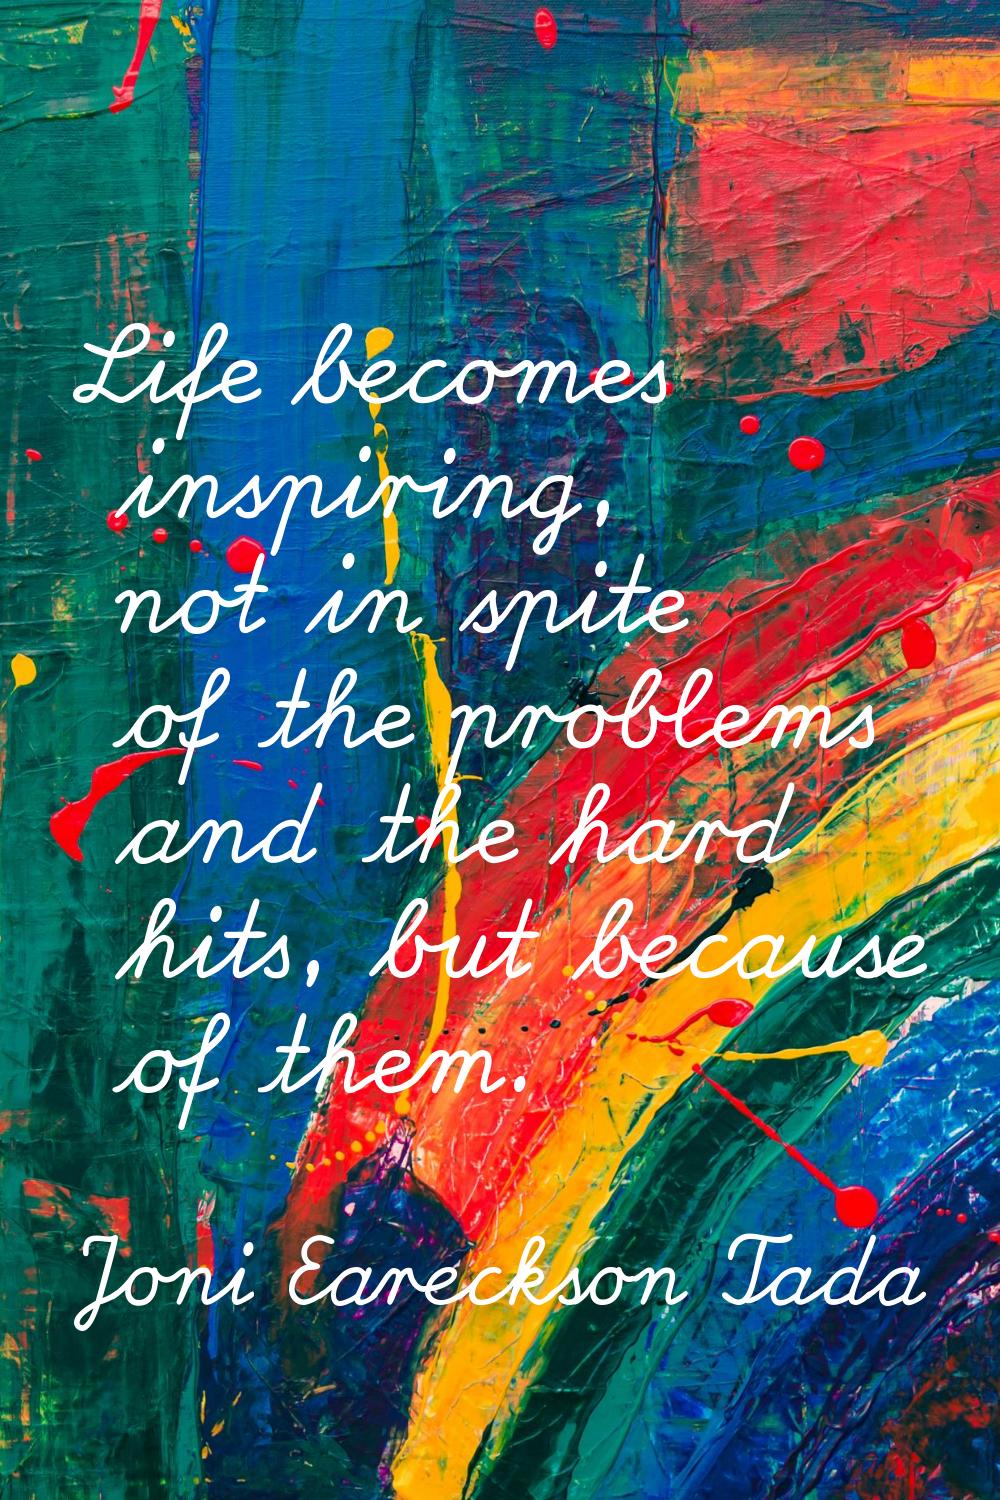 Life becomes inspiring, not in spite of the problems and the hard hits, but because of them.